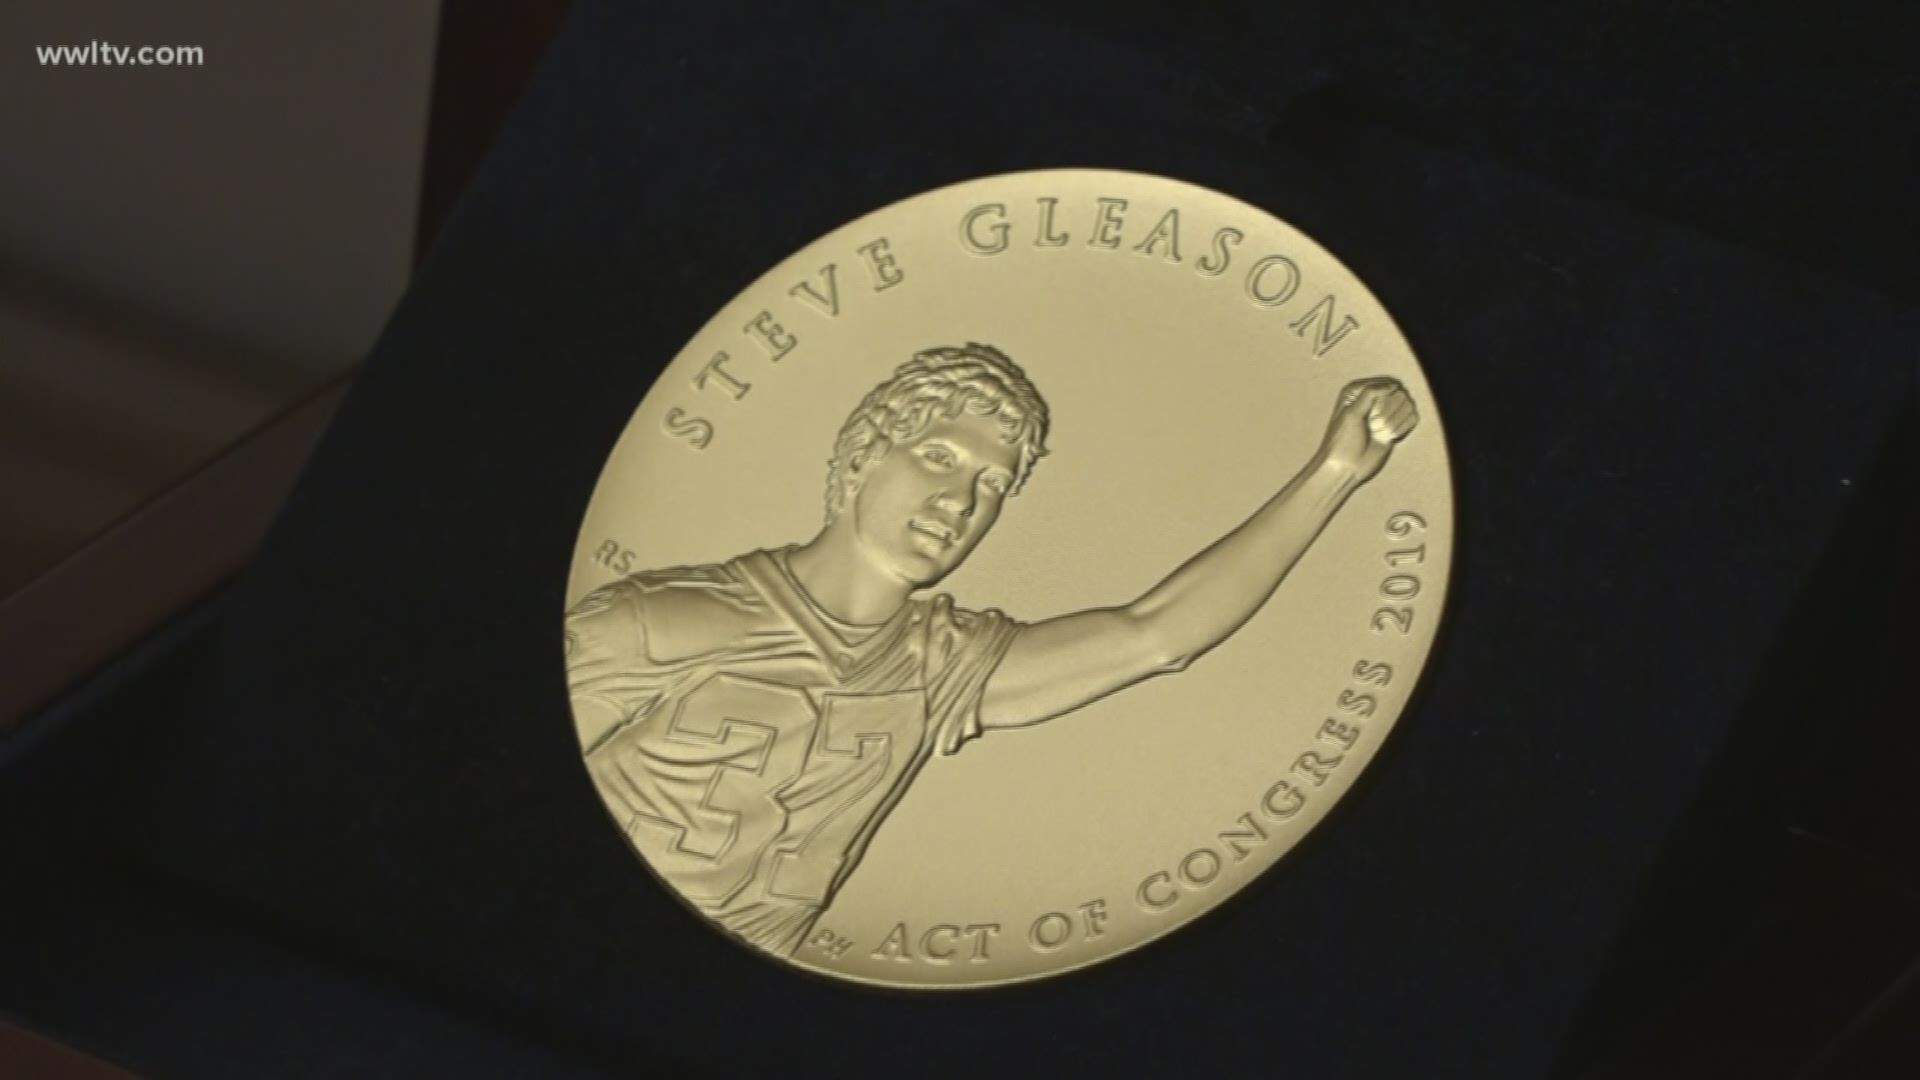 The former New Orleans Saints and current advocate for patients with Lou Gehrig's disease was bestowed the Congressional Gold Medal Wednesday in Washington D.C.